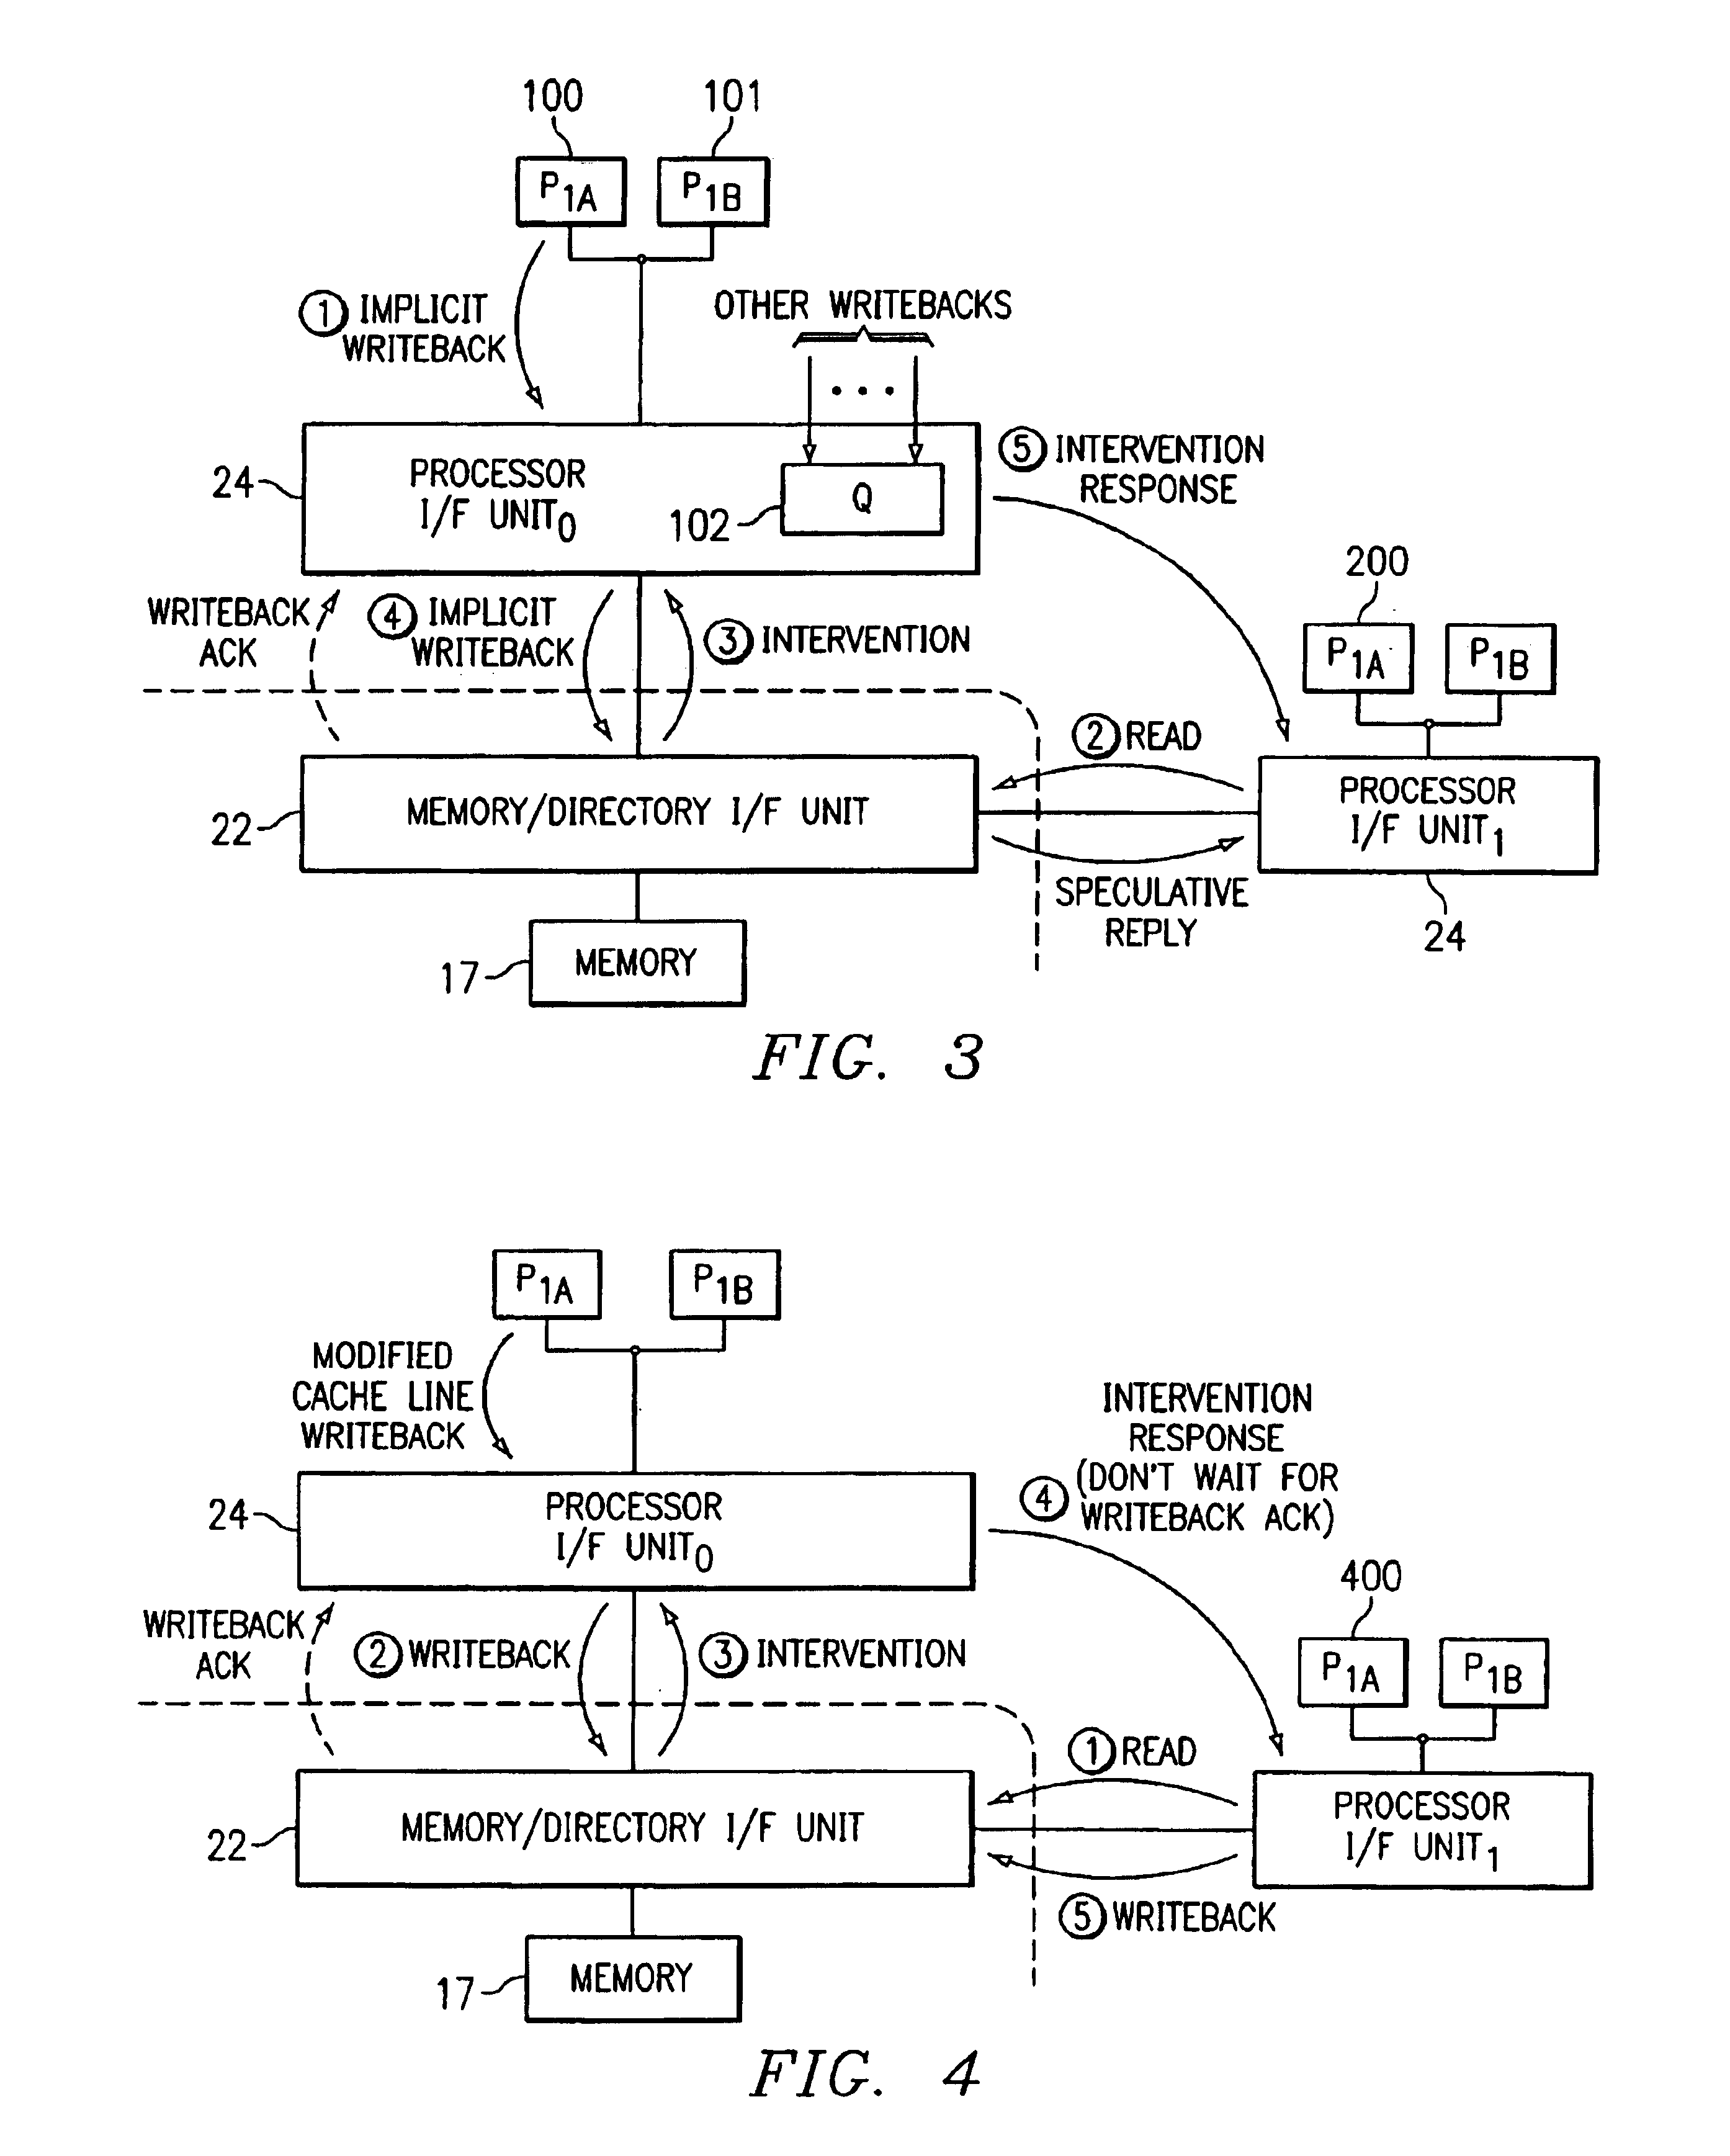 System and method for handling updates to memory in a distributed shared memory system